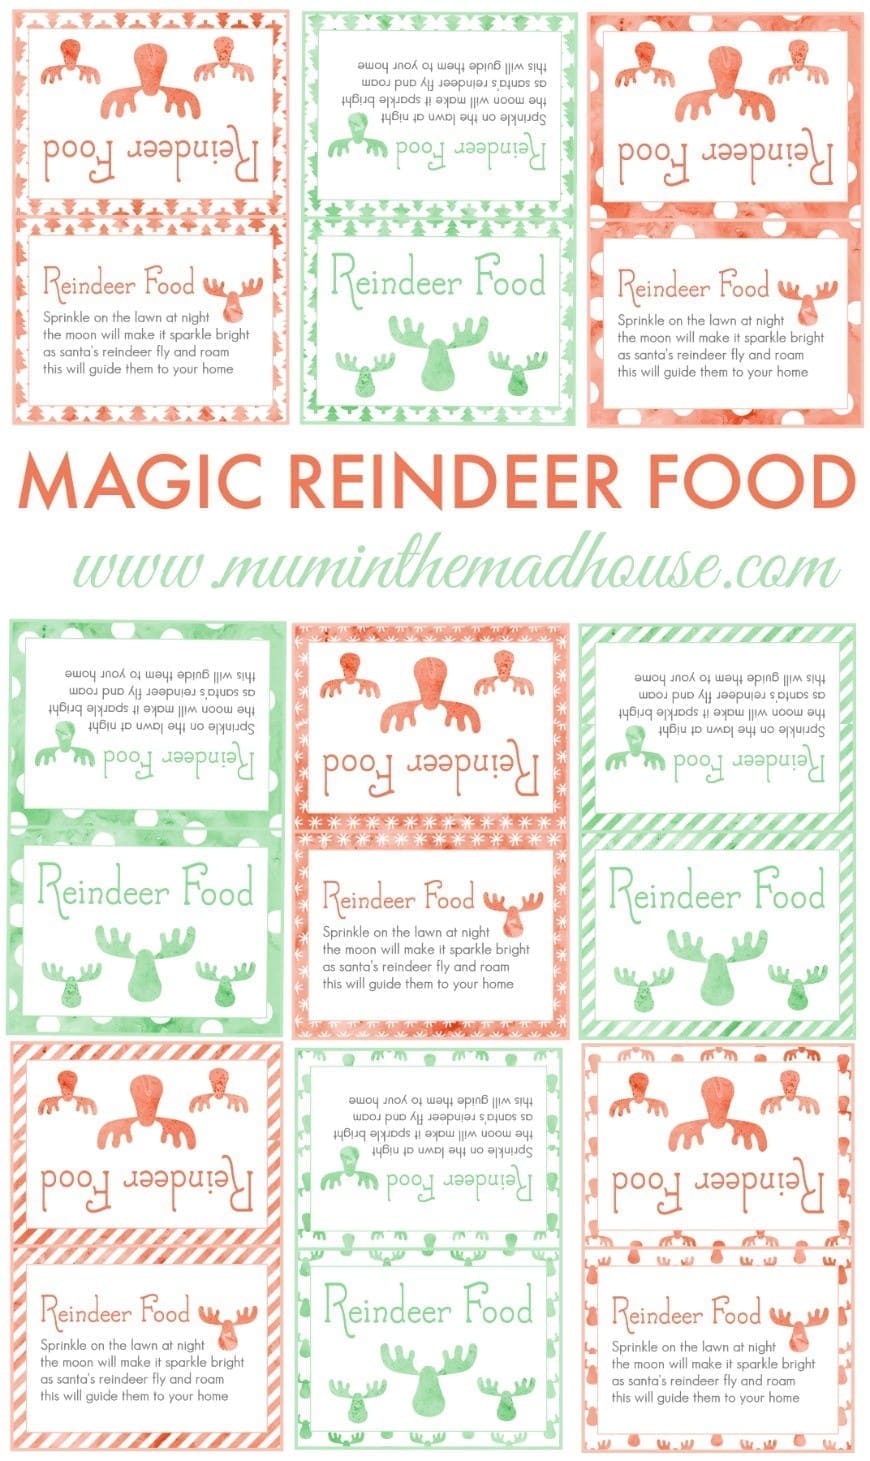 10 free printable labels for magic reindeer food. Make sure the reindeers find you and are fed on Christmas Eve with these fun, festive and free printable labels and recipe for reindeer food 